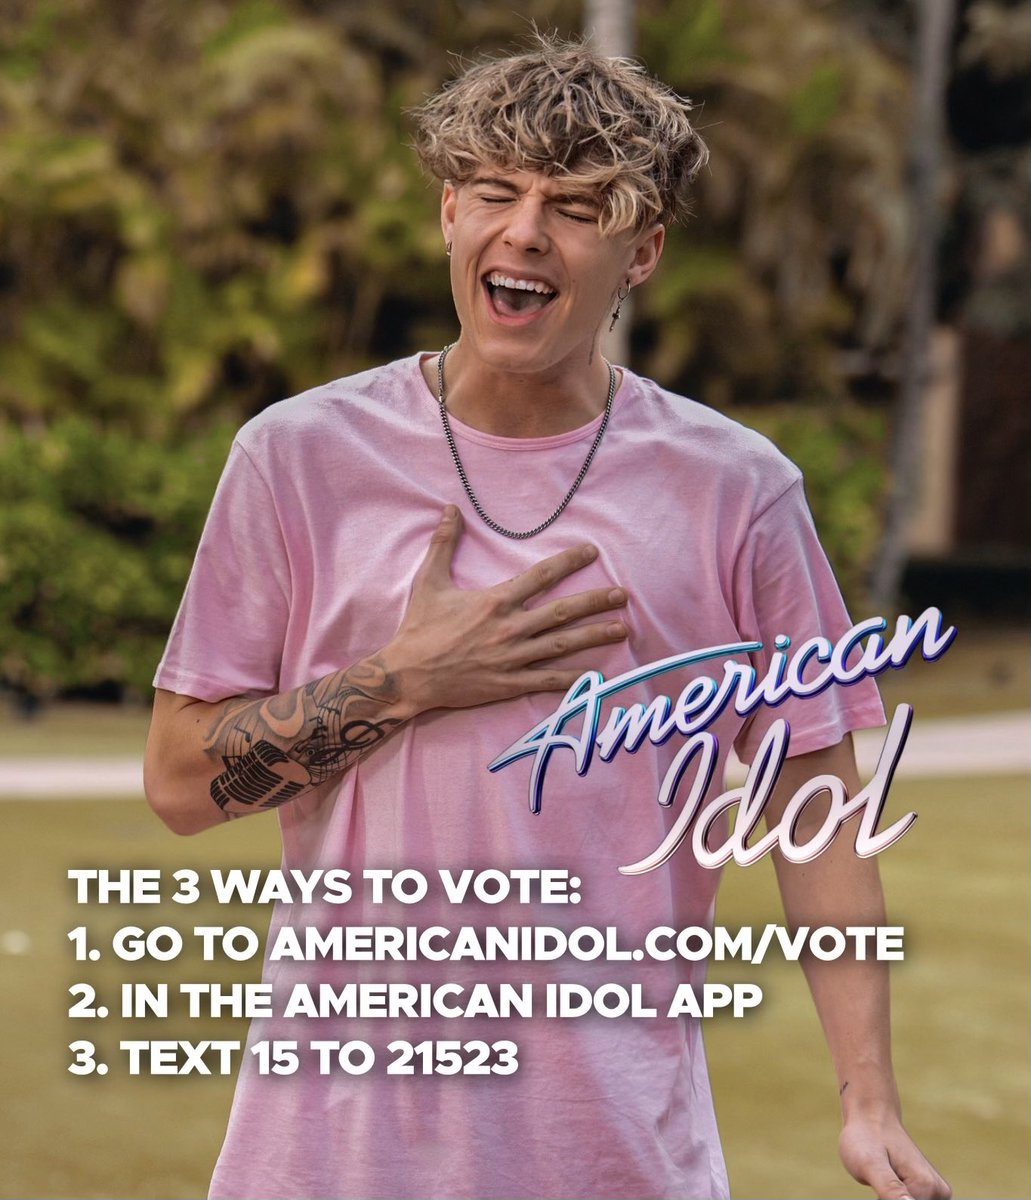 We did it fam!!! Thank you 🎉🎉🙏 Make sure to vote tonight - starting at 11pm EST.! #Top20 #AmericanIdol #Vote4Sol